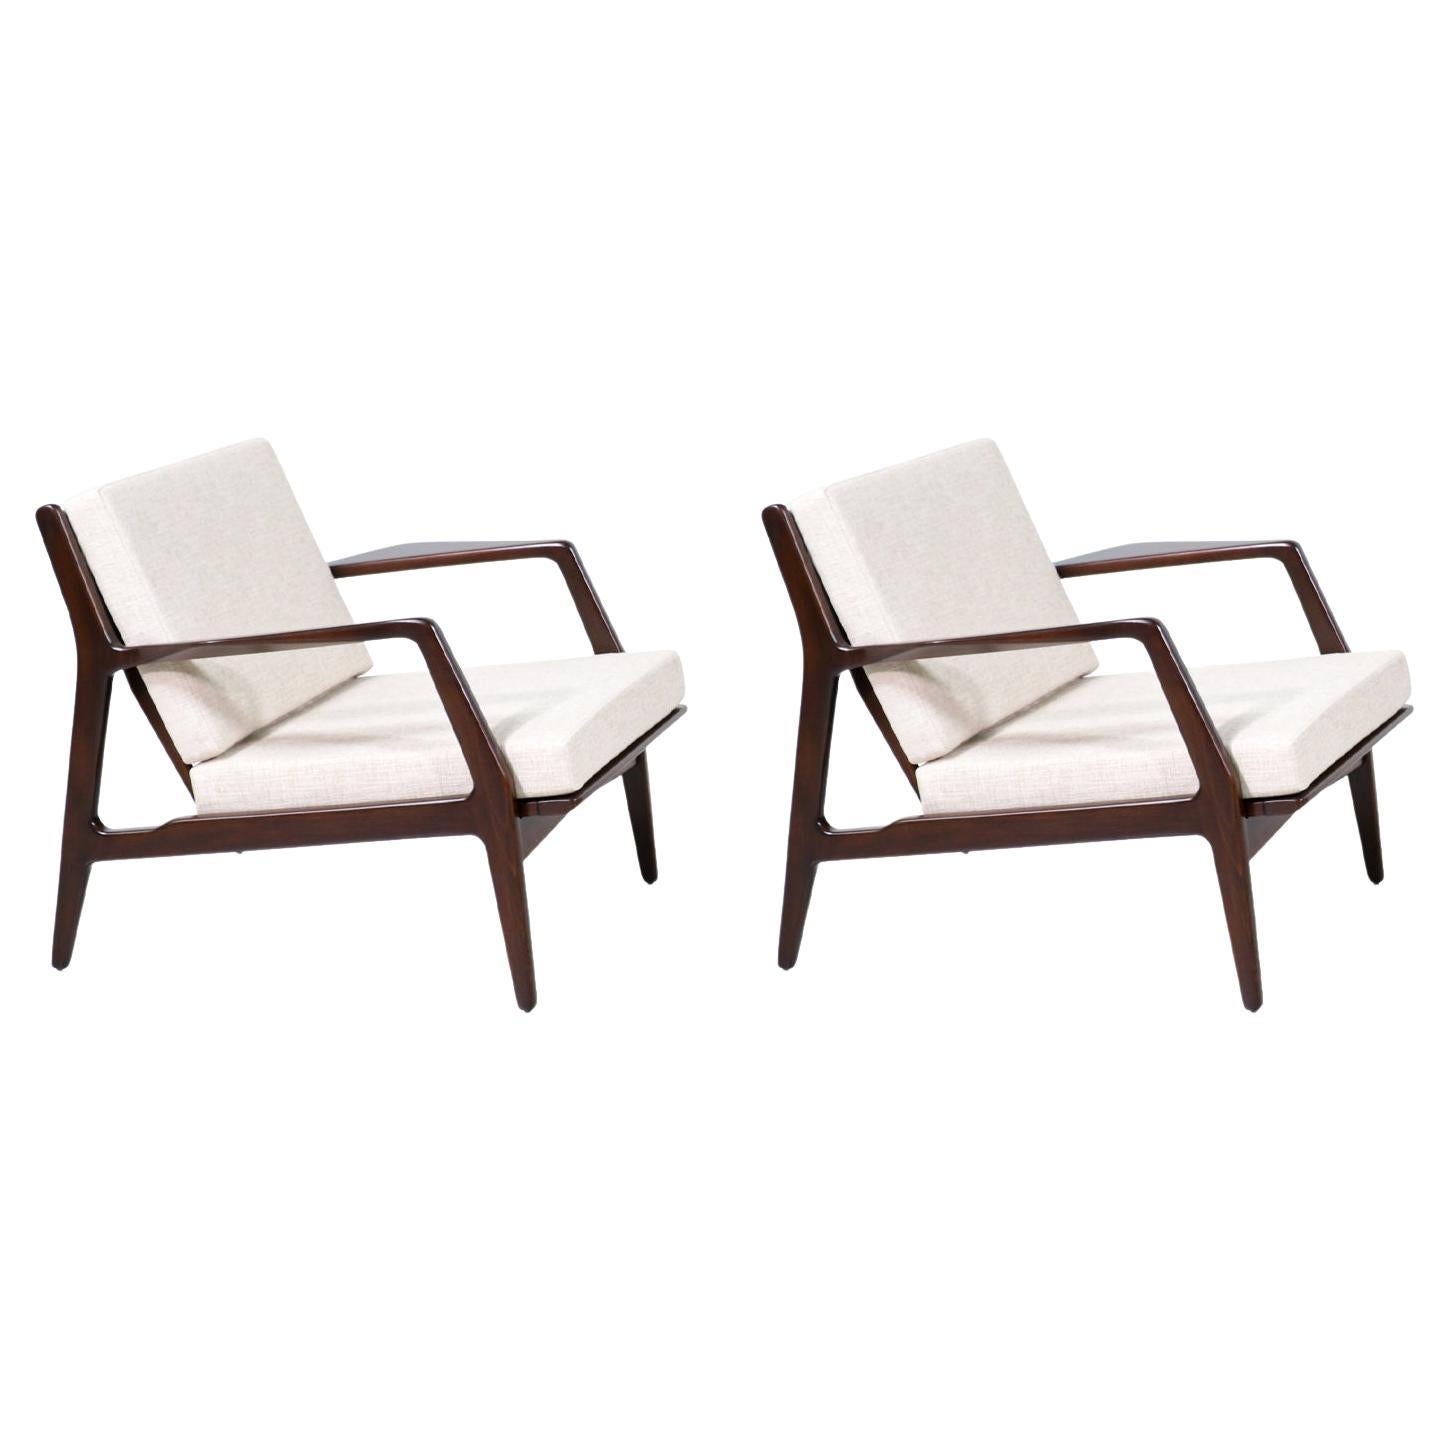 Mid-Century Sculpted Lounge Chairs by Ib Kofod-Larsen for Selig